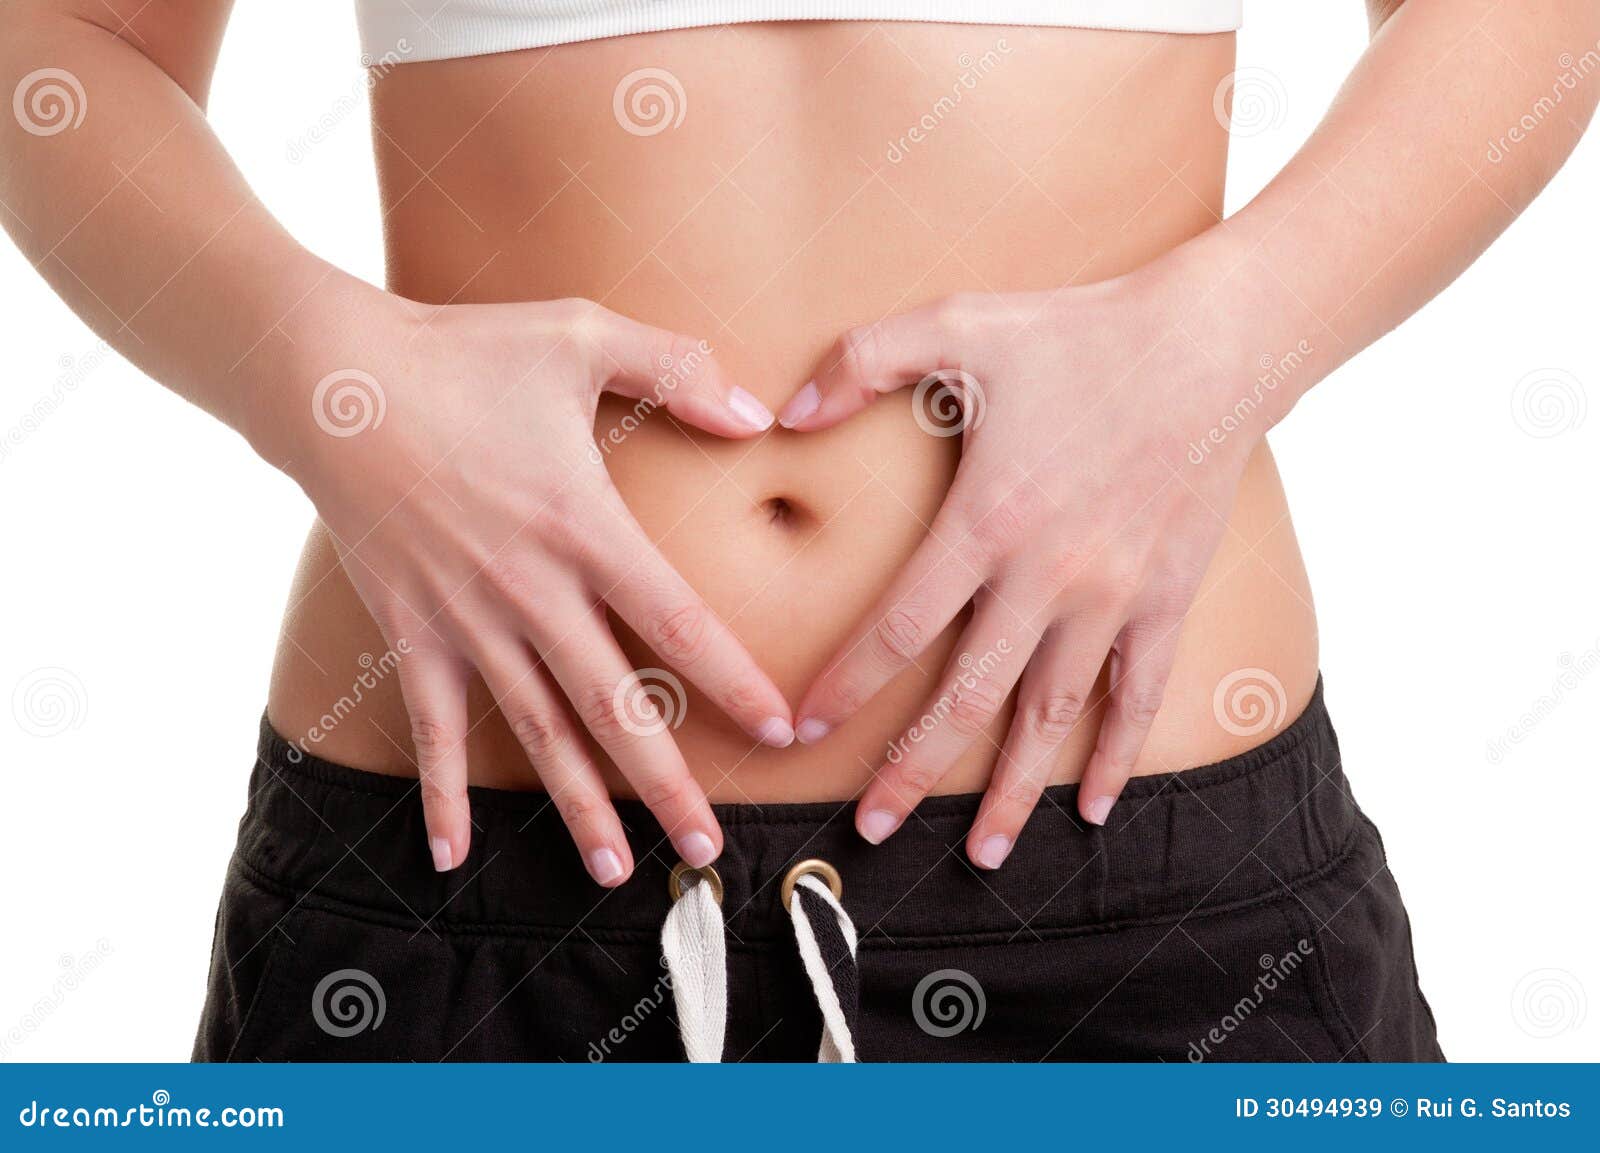 Flat Belly Images – Browse 39,010 Stock Photos, Vectors, and